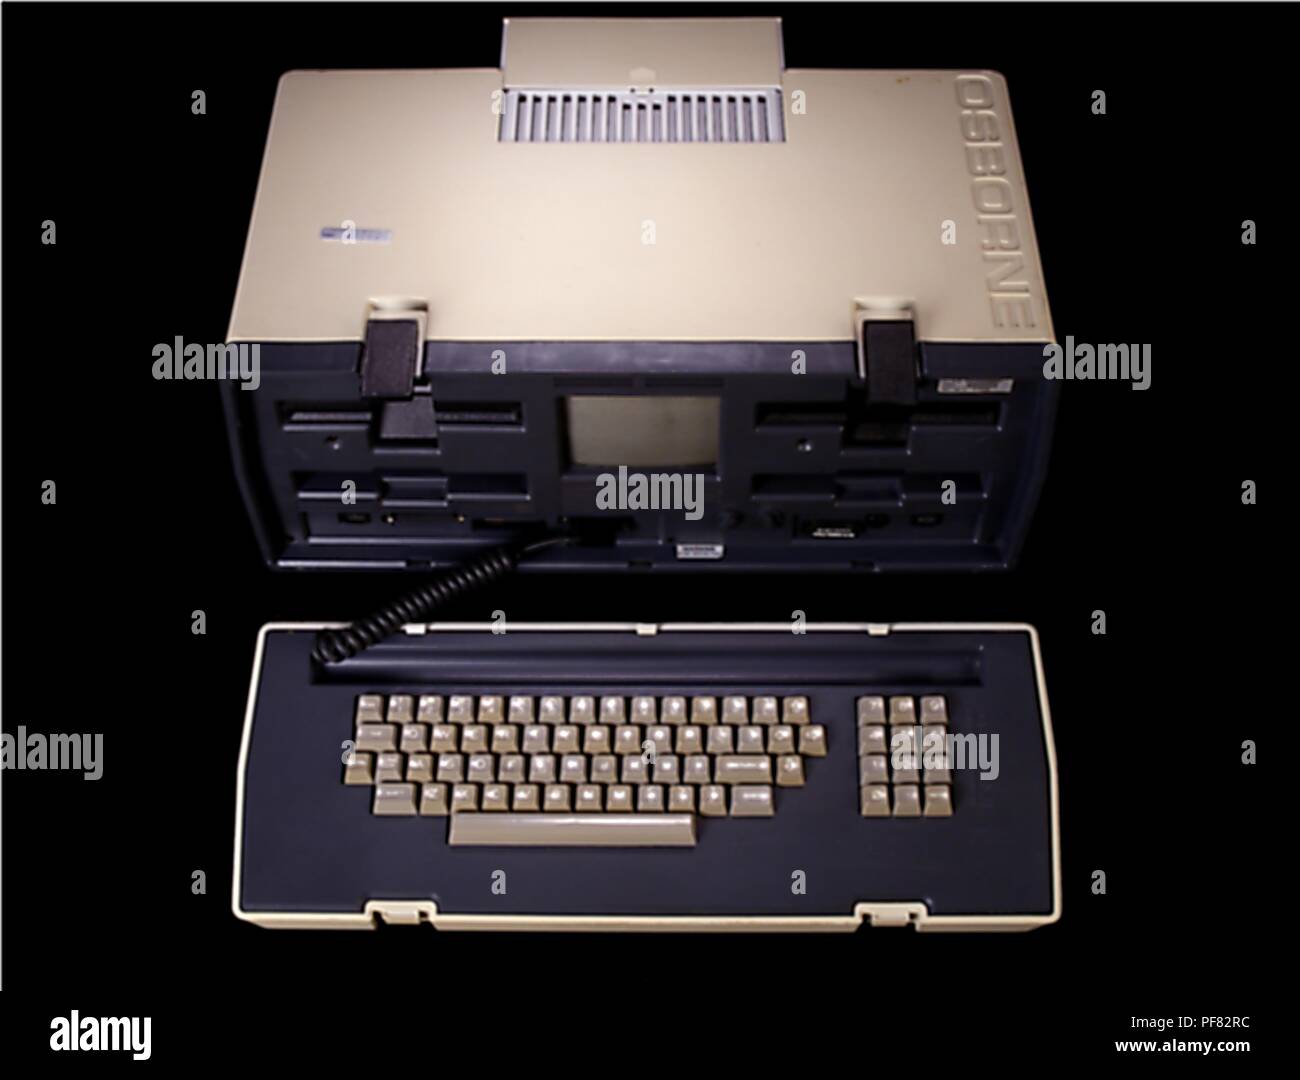 Osborne 1, first truly portable computer, 2004. Image courtesy Centers for Disease Control (CDC) / James Gathany. () Stock Photo